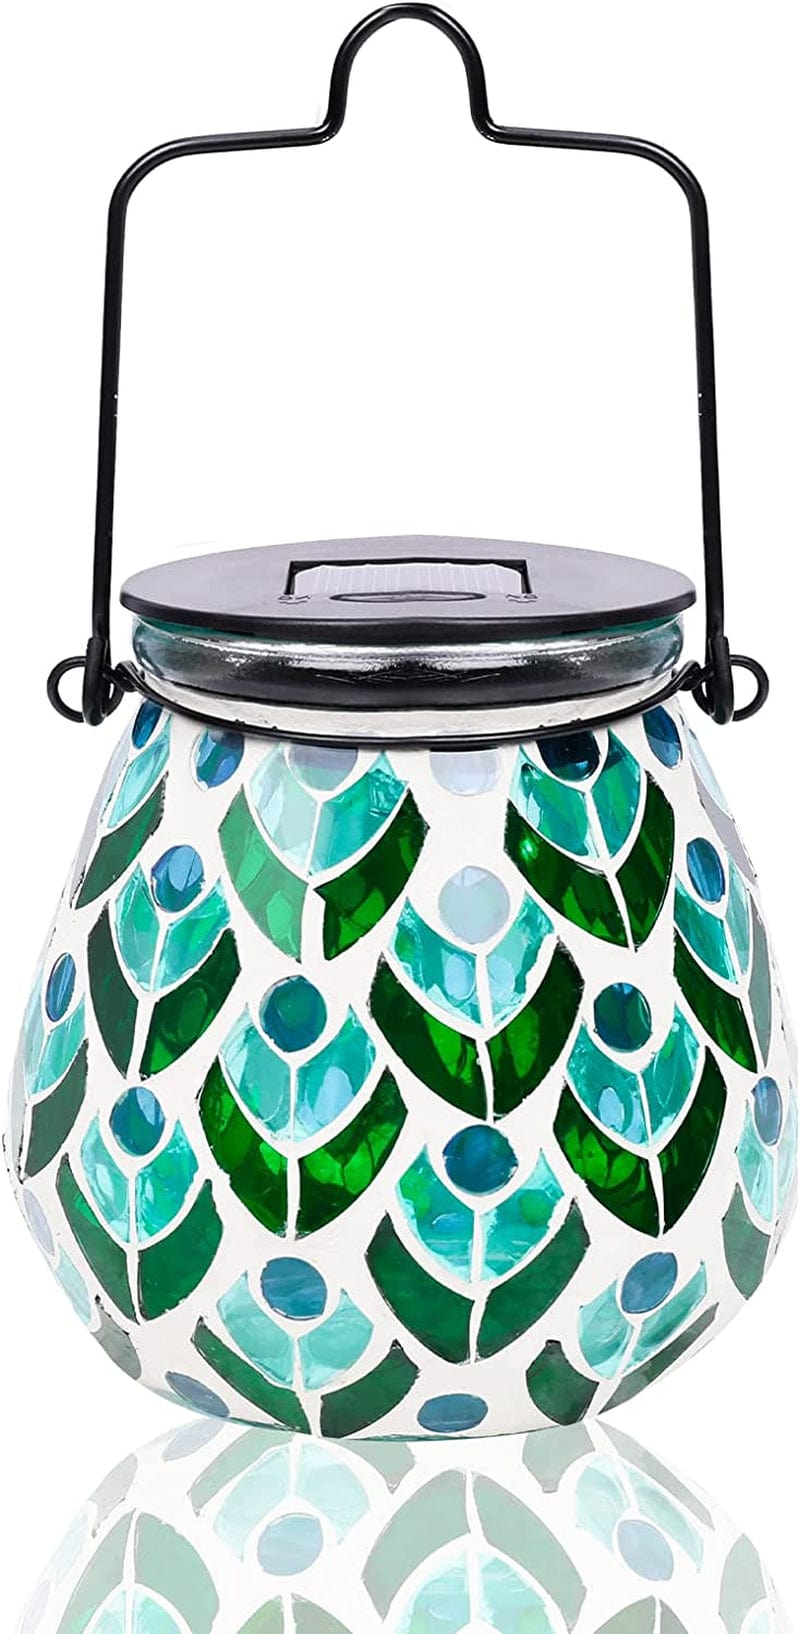 Afirst Mosaic Solar Lanterns Outdood - Glass Hanging Solar Lights Hollow Out Waterproof Table Lamp Outdoor Decorative for Garden, Patio, Holiday Party Outdoor Decoration Home & Garden > Lighting > Lamps Viigarden Peacock  